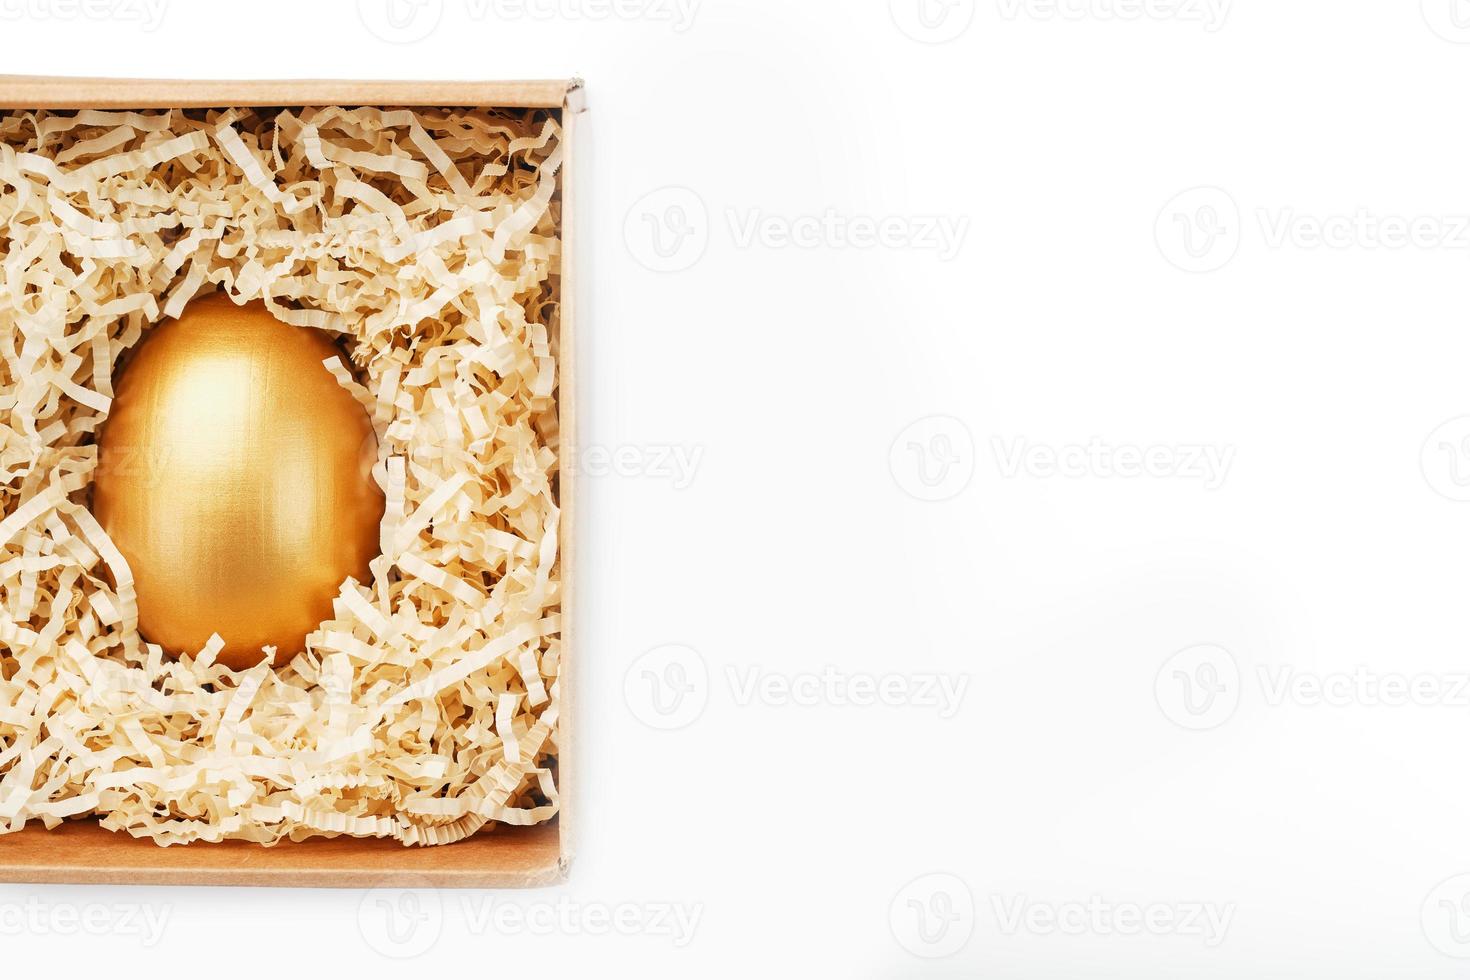 Golden egg in a box on a white background concept of exclusivity, best choice, prize, special surprise, expensive gift. The concept of minimalism. photo